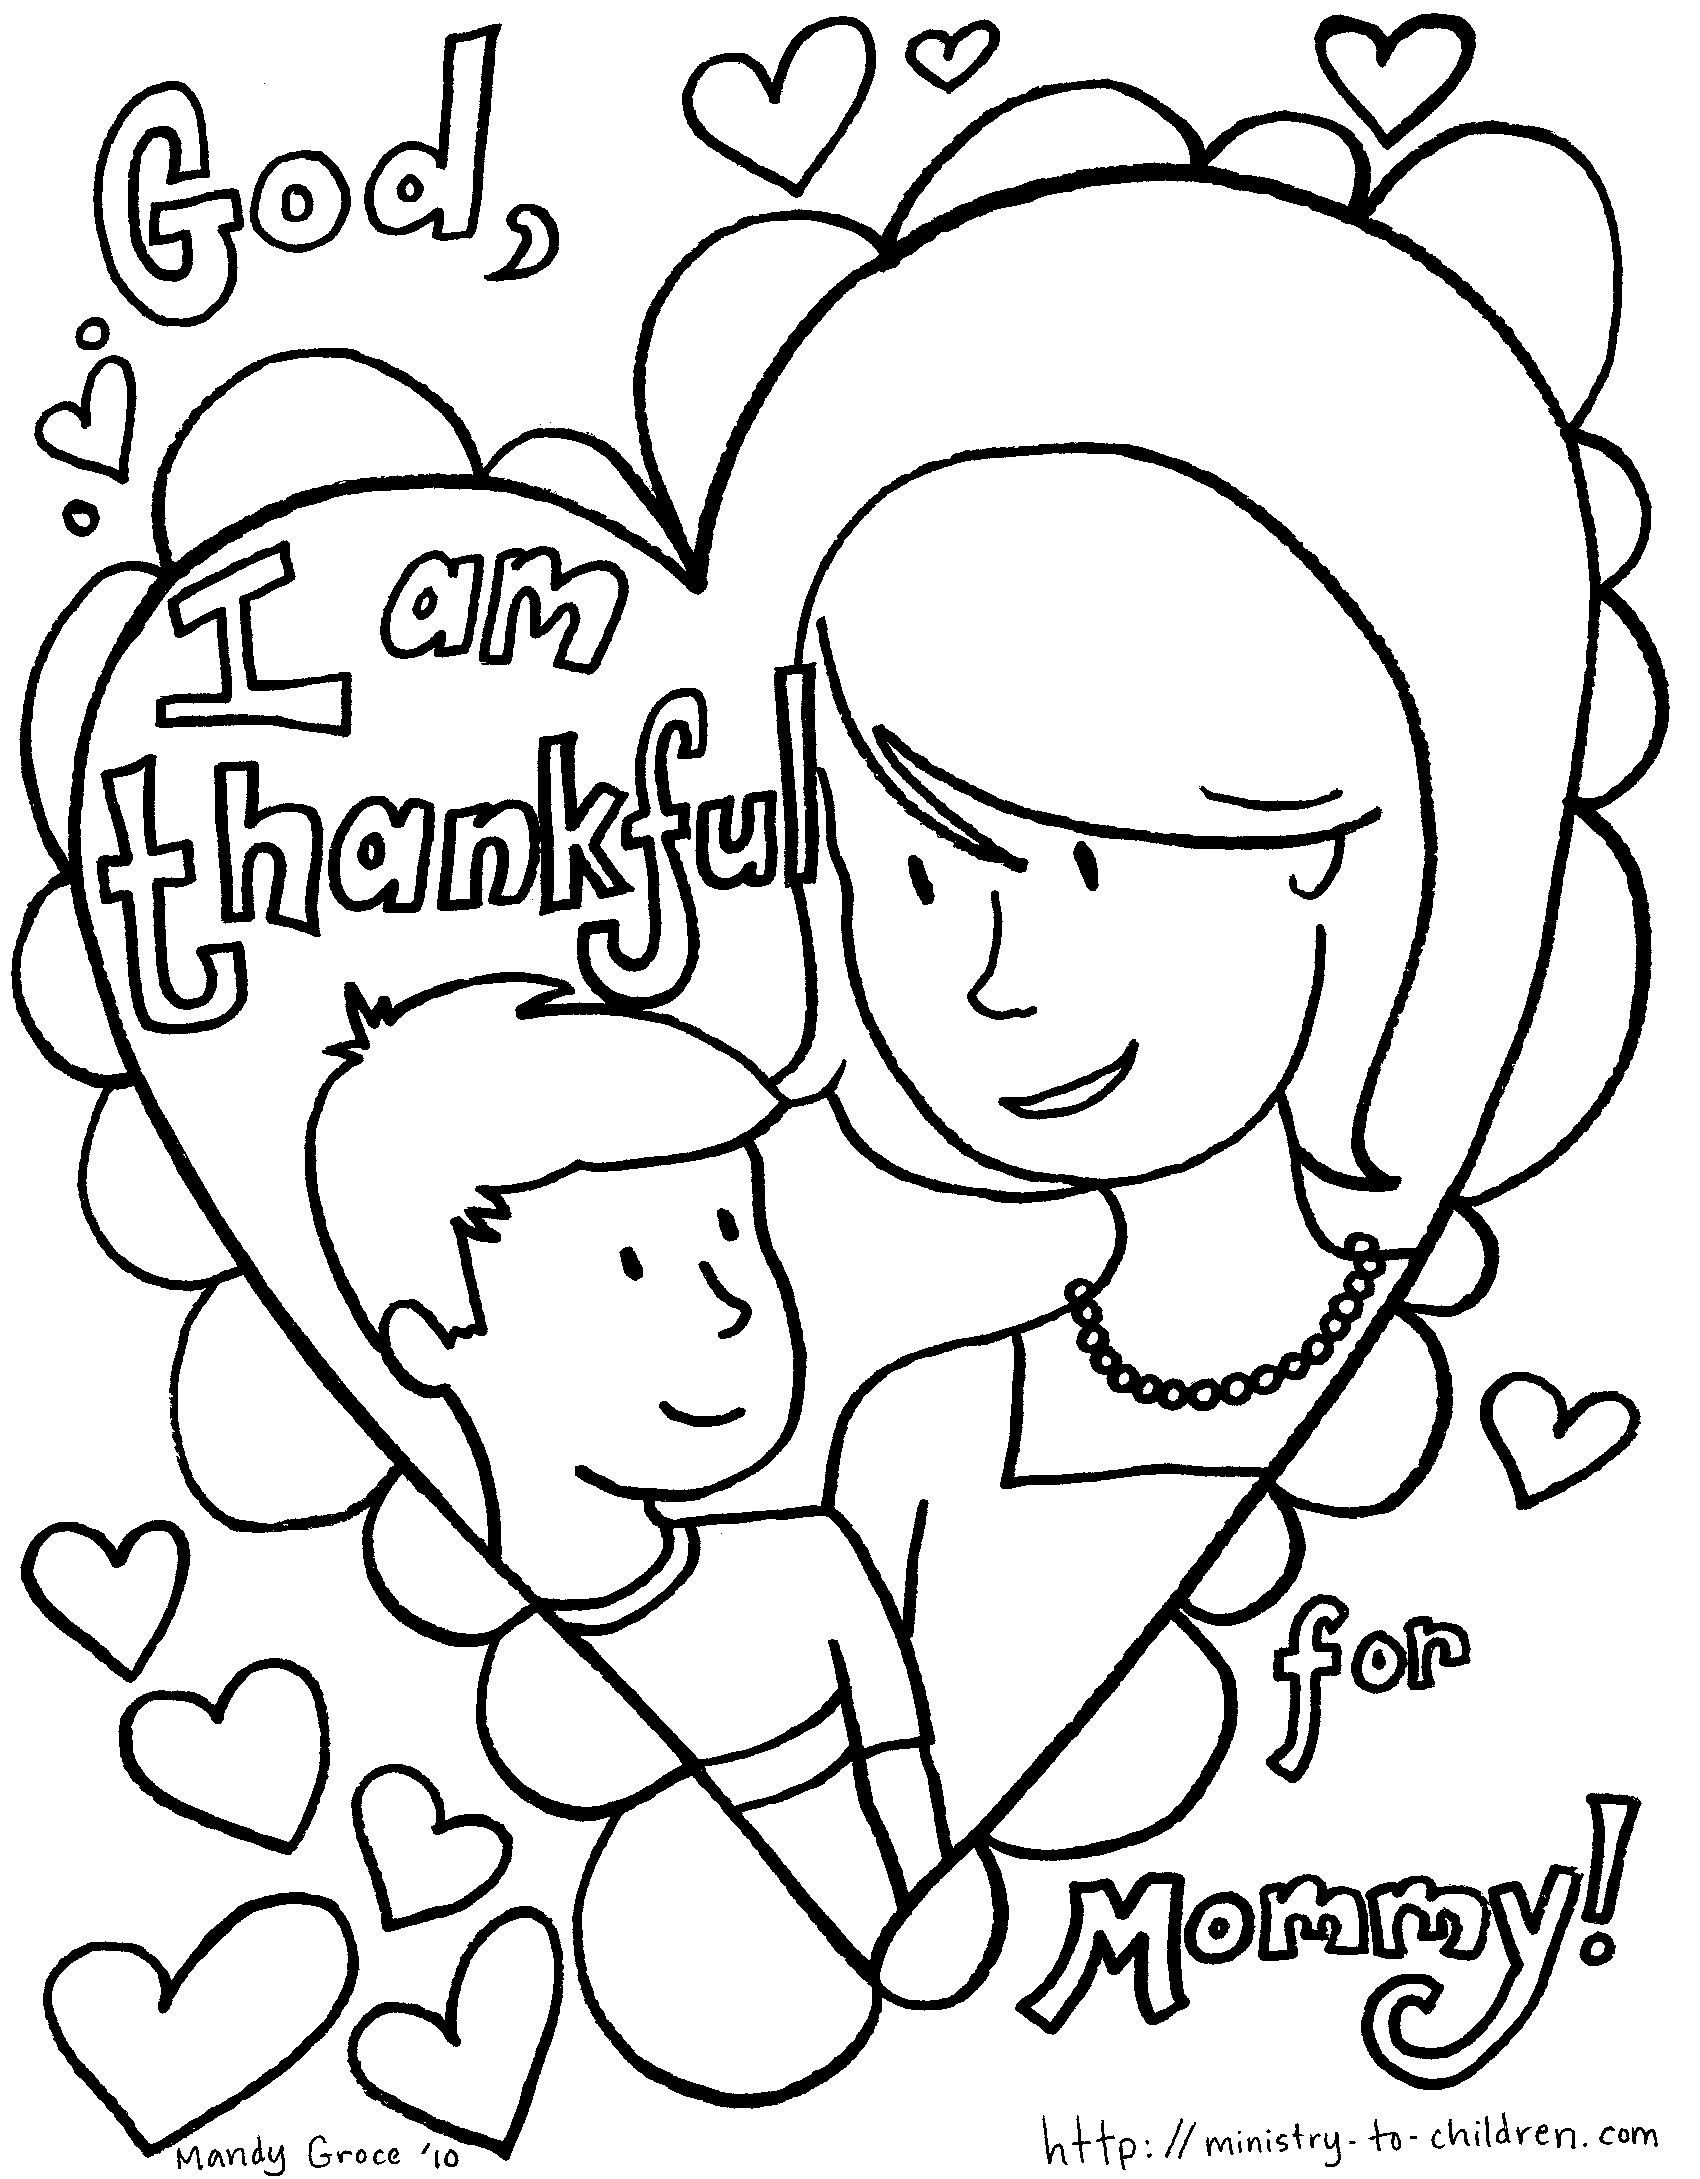 Mothers Day Coloring Pages For Toddlers
 Mother s Day coloring page ΓΙΟΡΤΗ ΜΗΤΕΡΑΣ